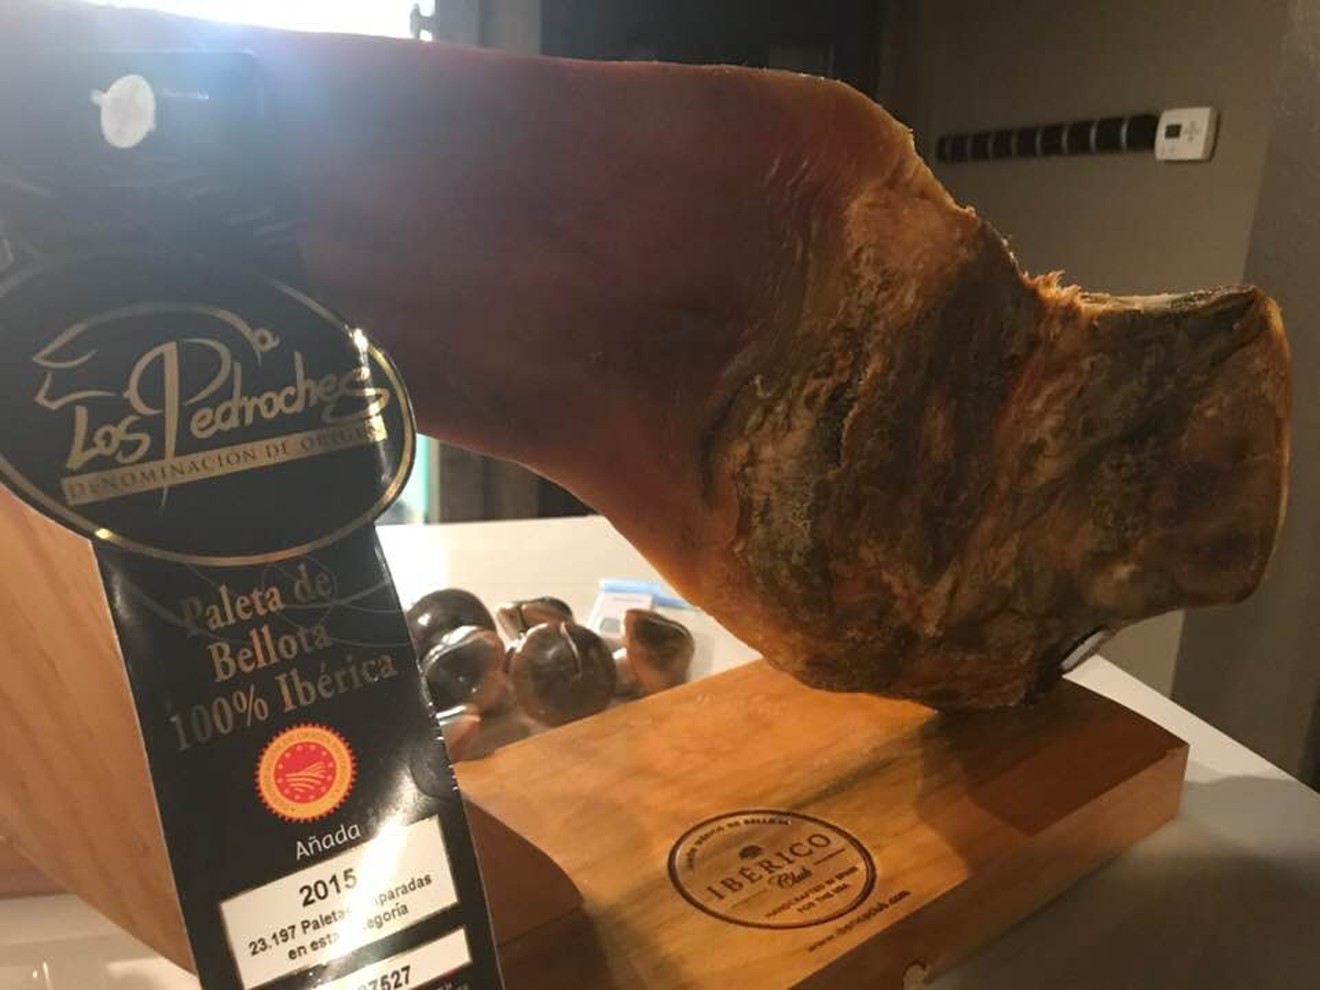 $1,000 piece of Los Pedroches Iberico ham to be served at eculent in Kemah.